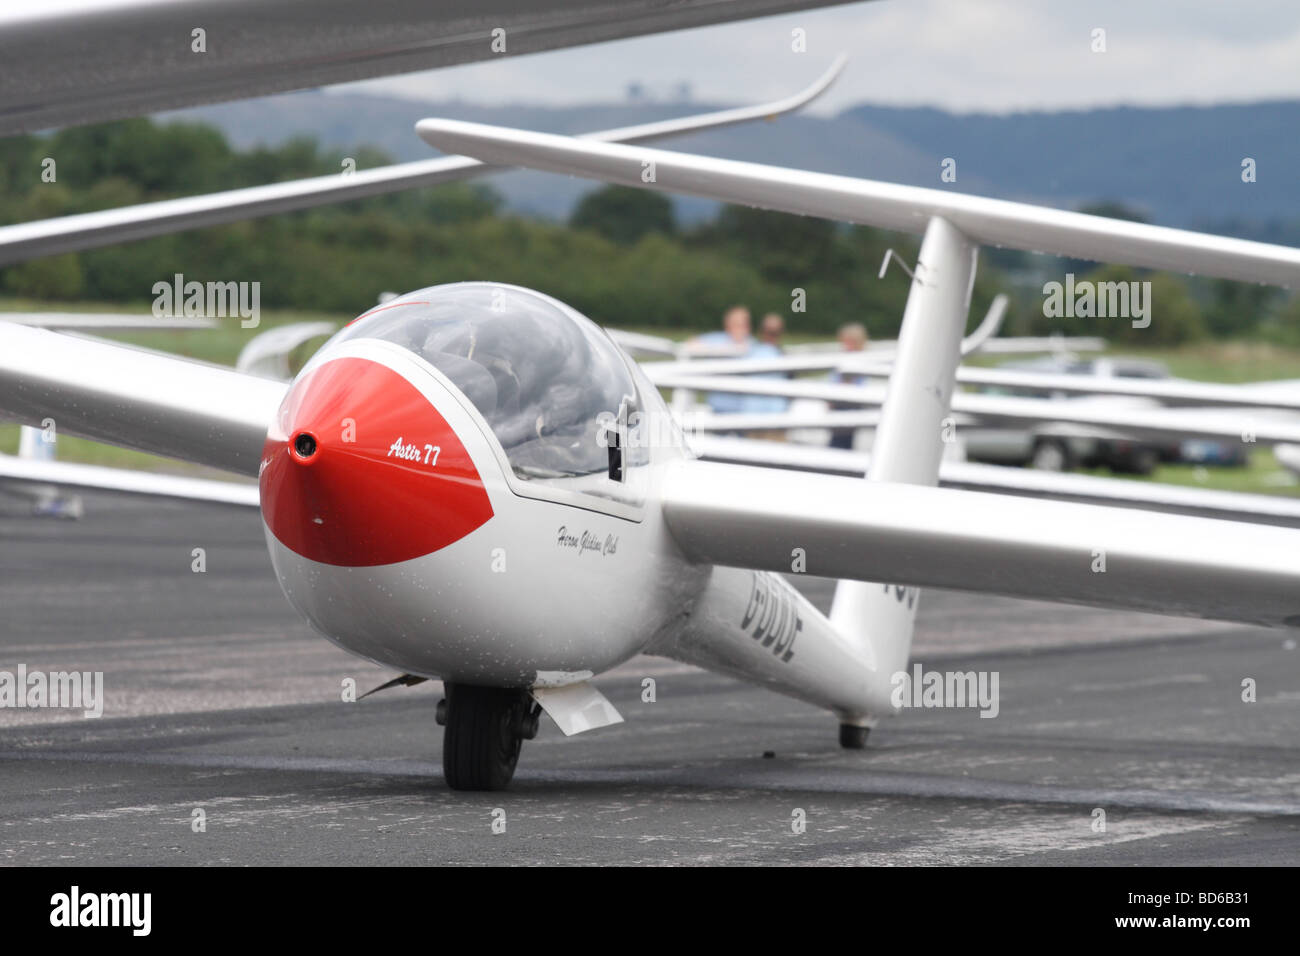 Gliders Grob G102 Astir CS77 single seat sports glider soaring sailplane waiting on the competition grid Stock Photo